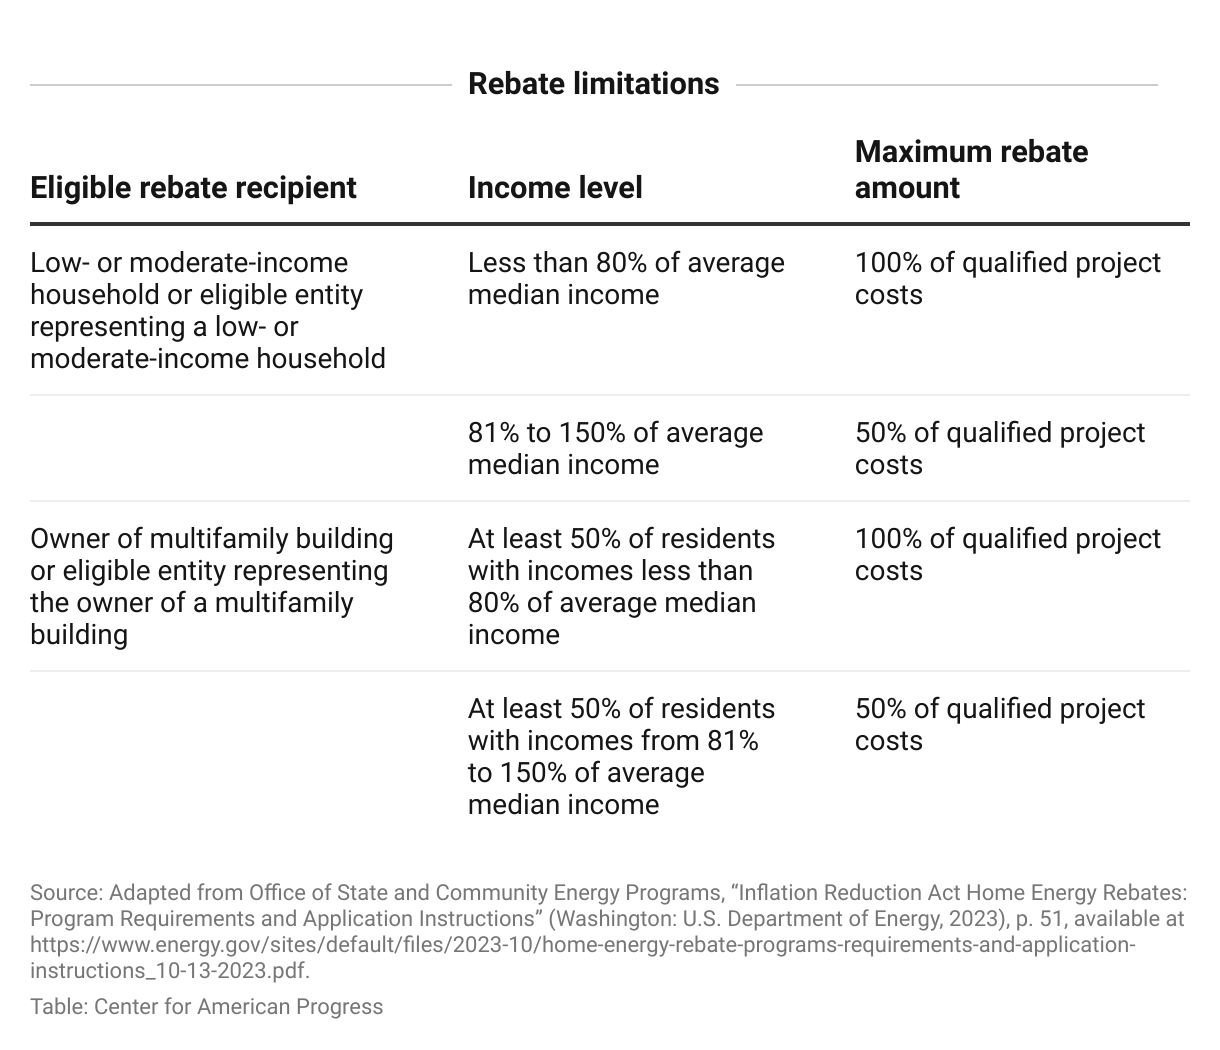 Table showing qualified products, services, and maximum rebate allotments for Home Electrification and Appliance Rebates.